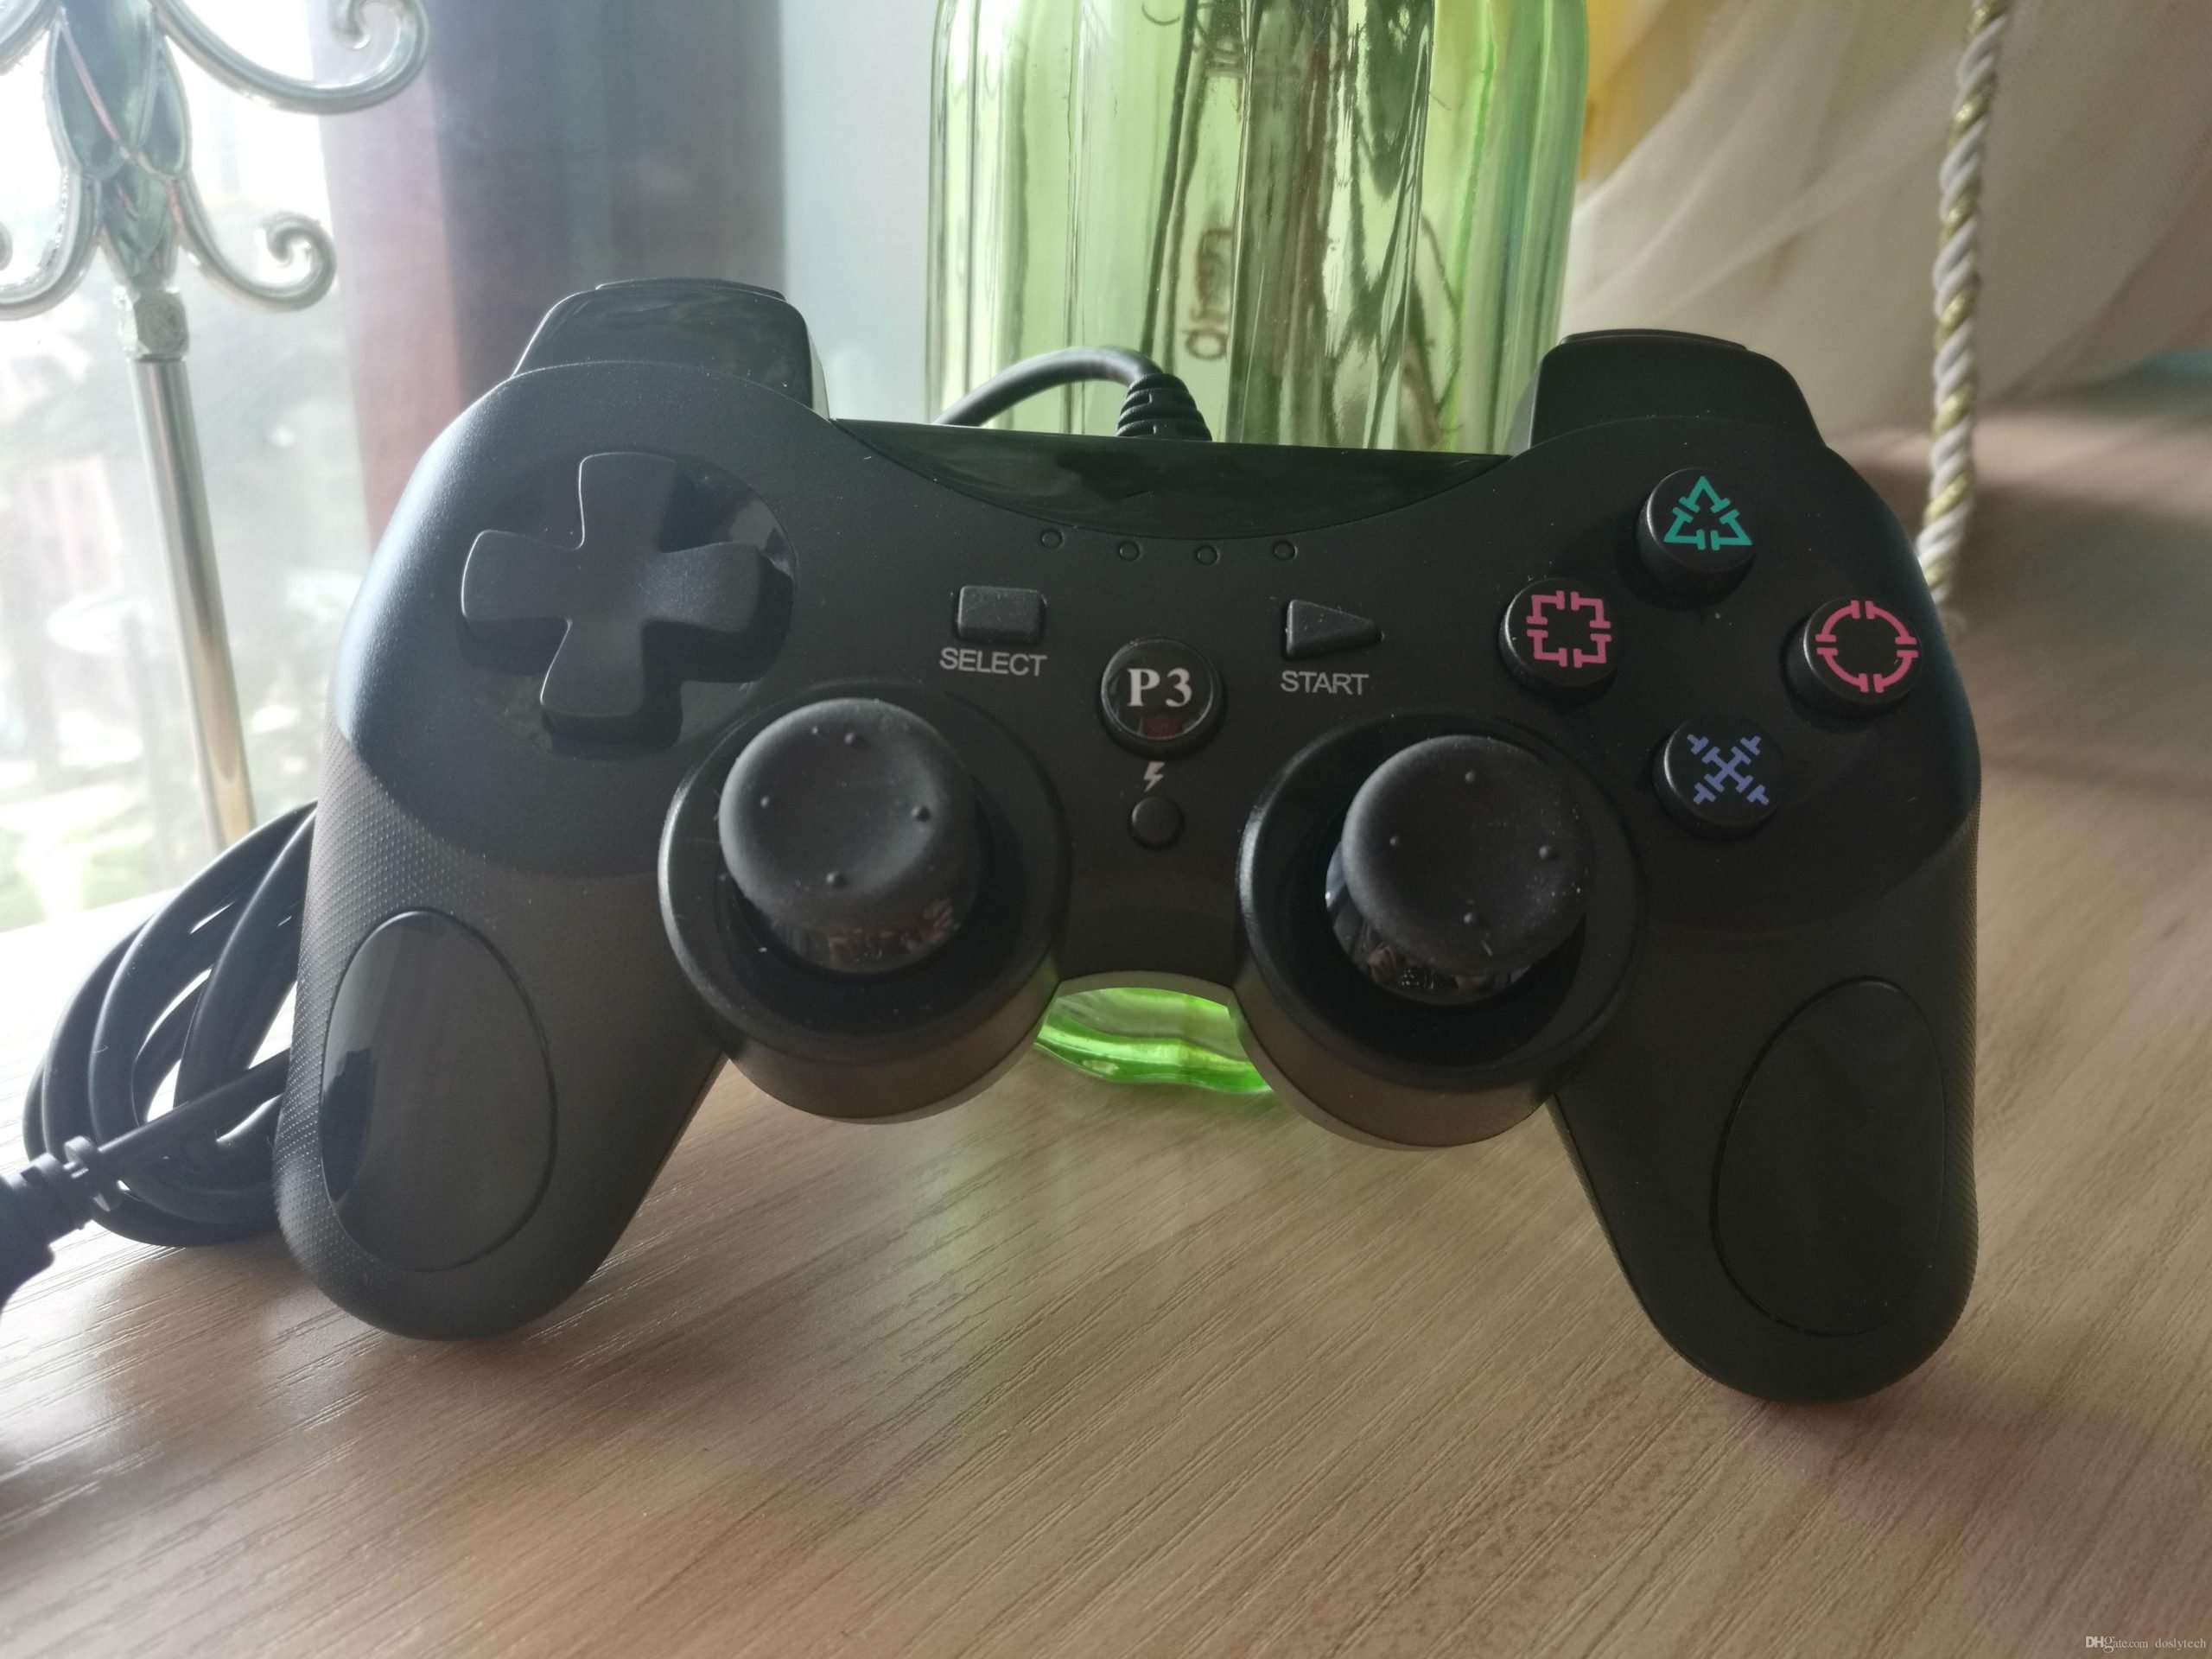 How to connect ps3 controller pc.